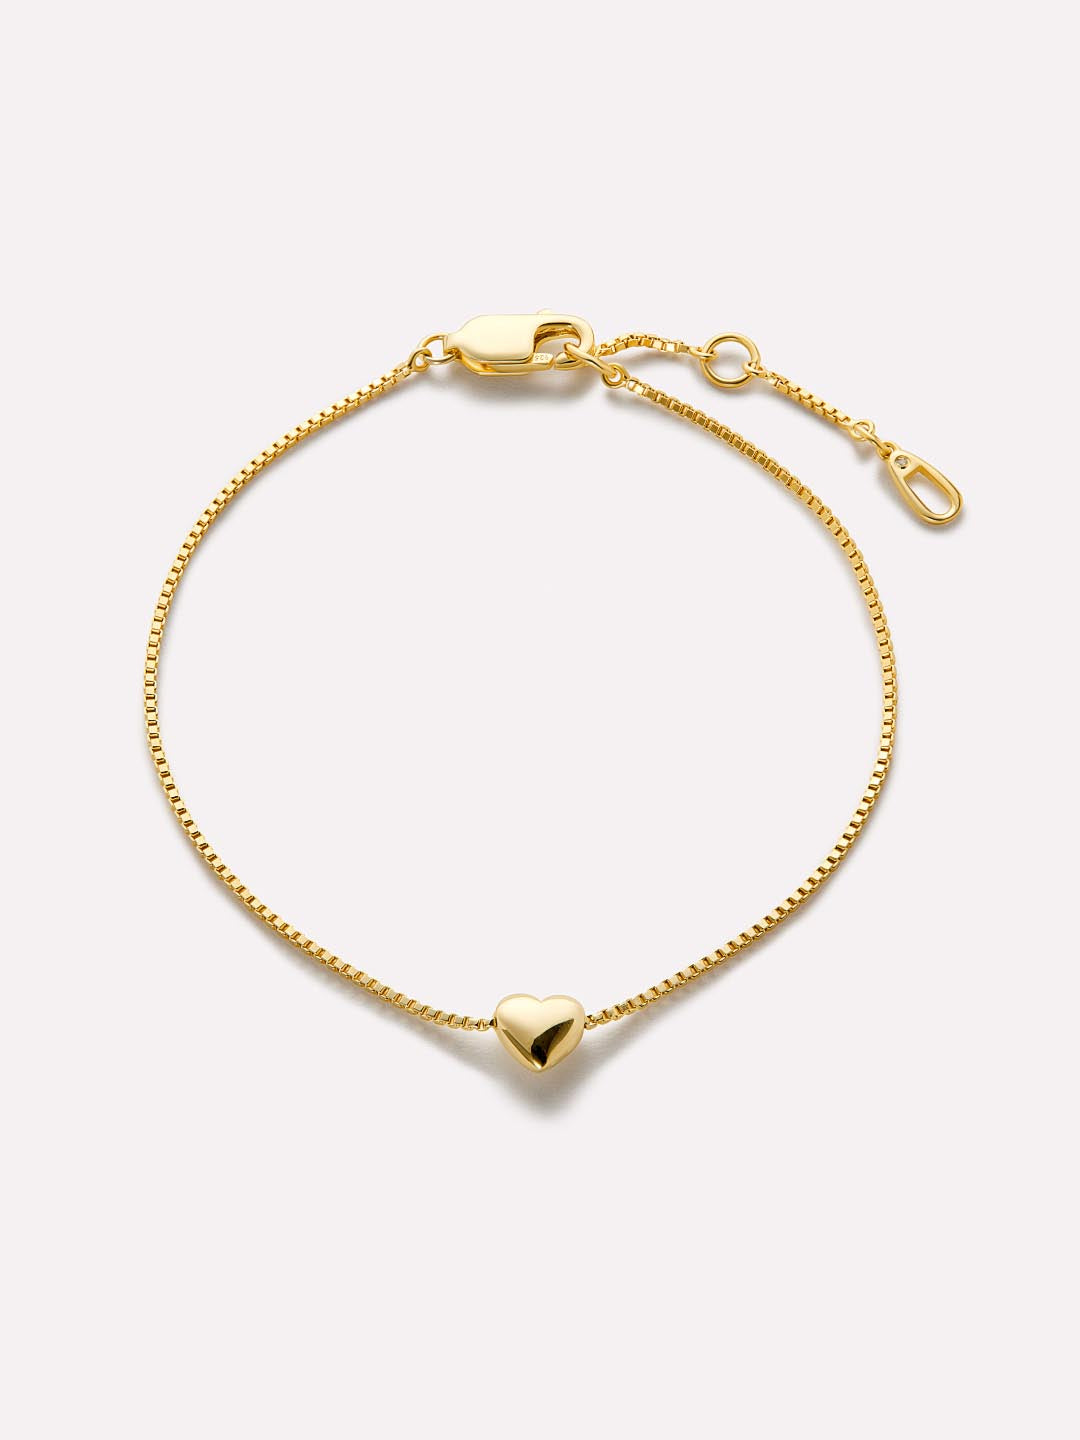 Heart Bracelet - Lana | Ana Luisa | Online Jewelry Store At Prices You'll  Love